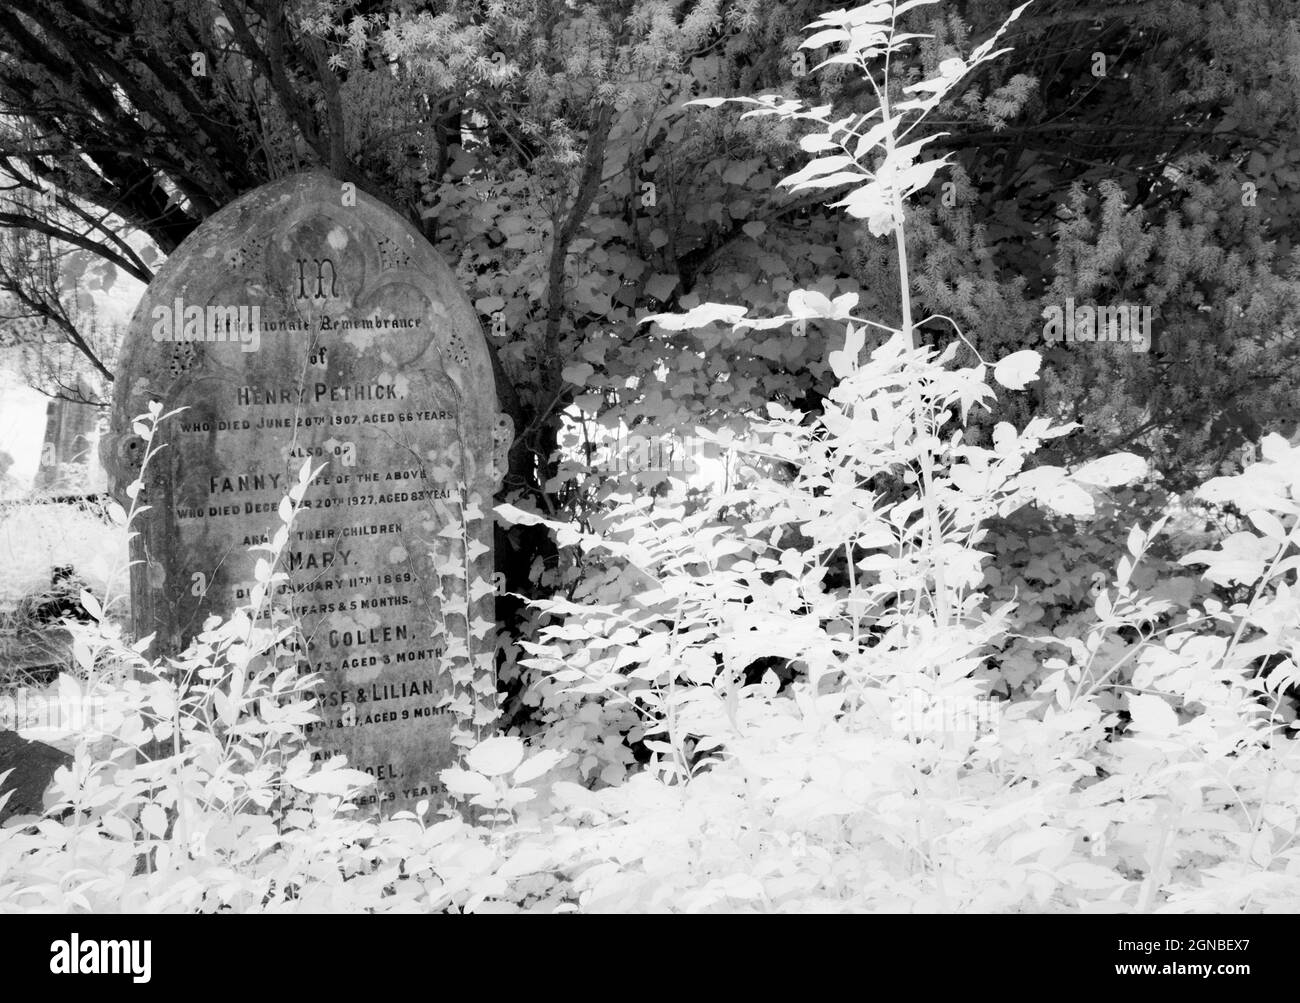 An infrared shot of an old, ivy-covered Victorian gravestone. Stock Photo